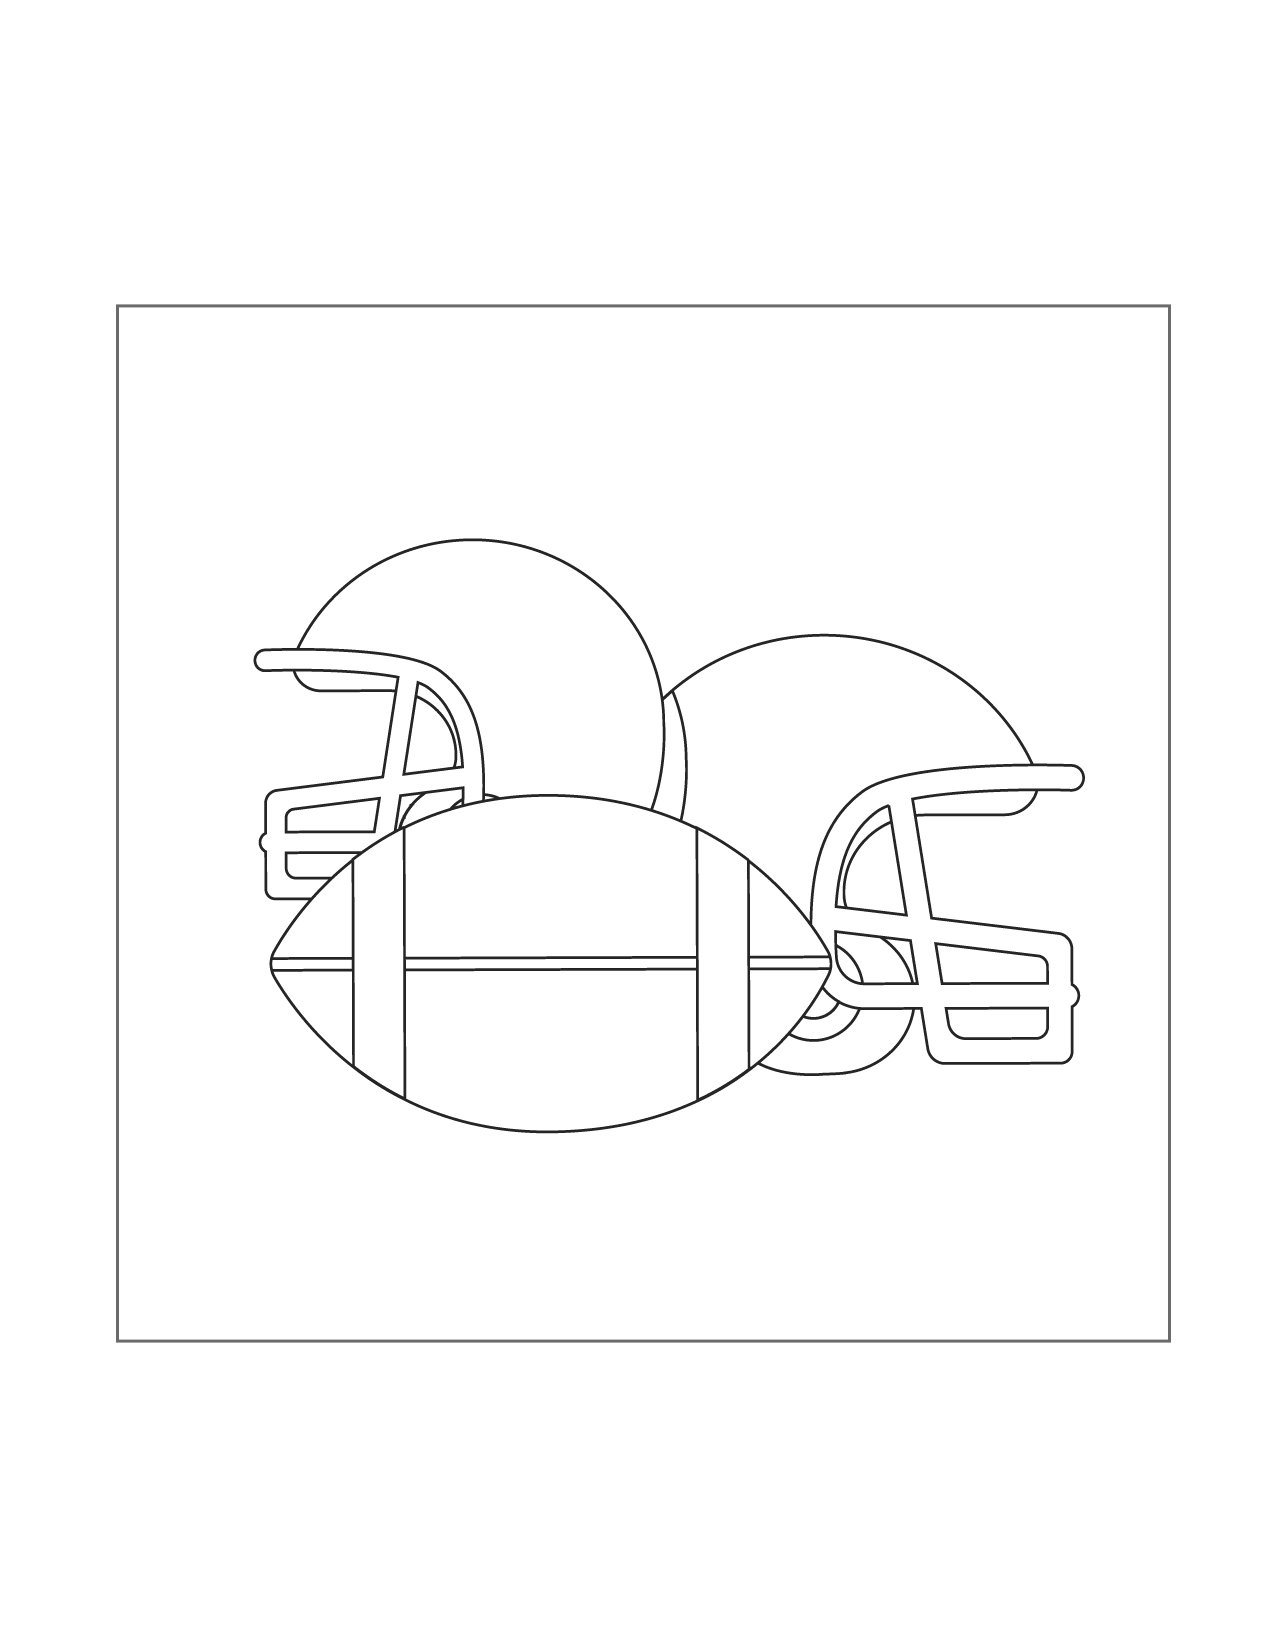 Football Helmet And Ball Coloring Page